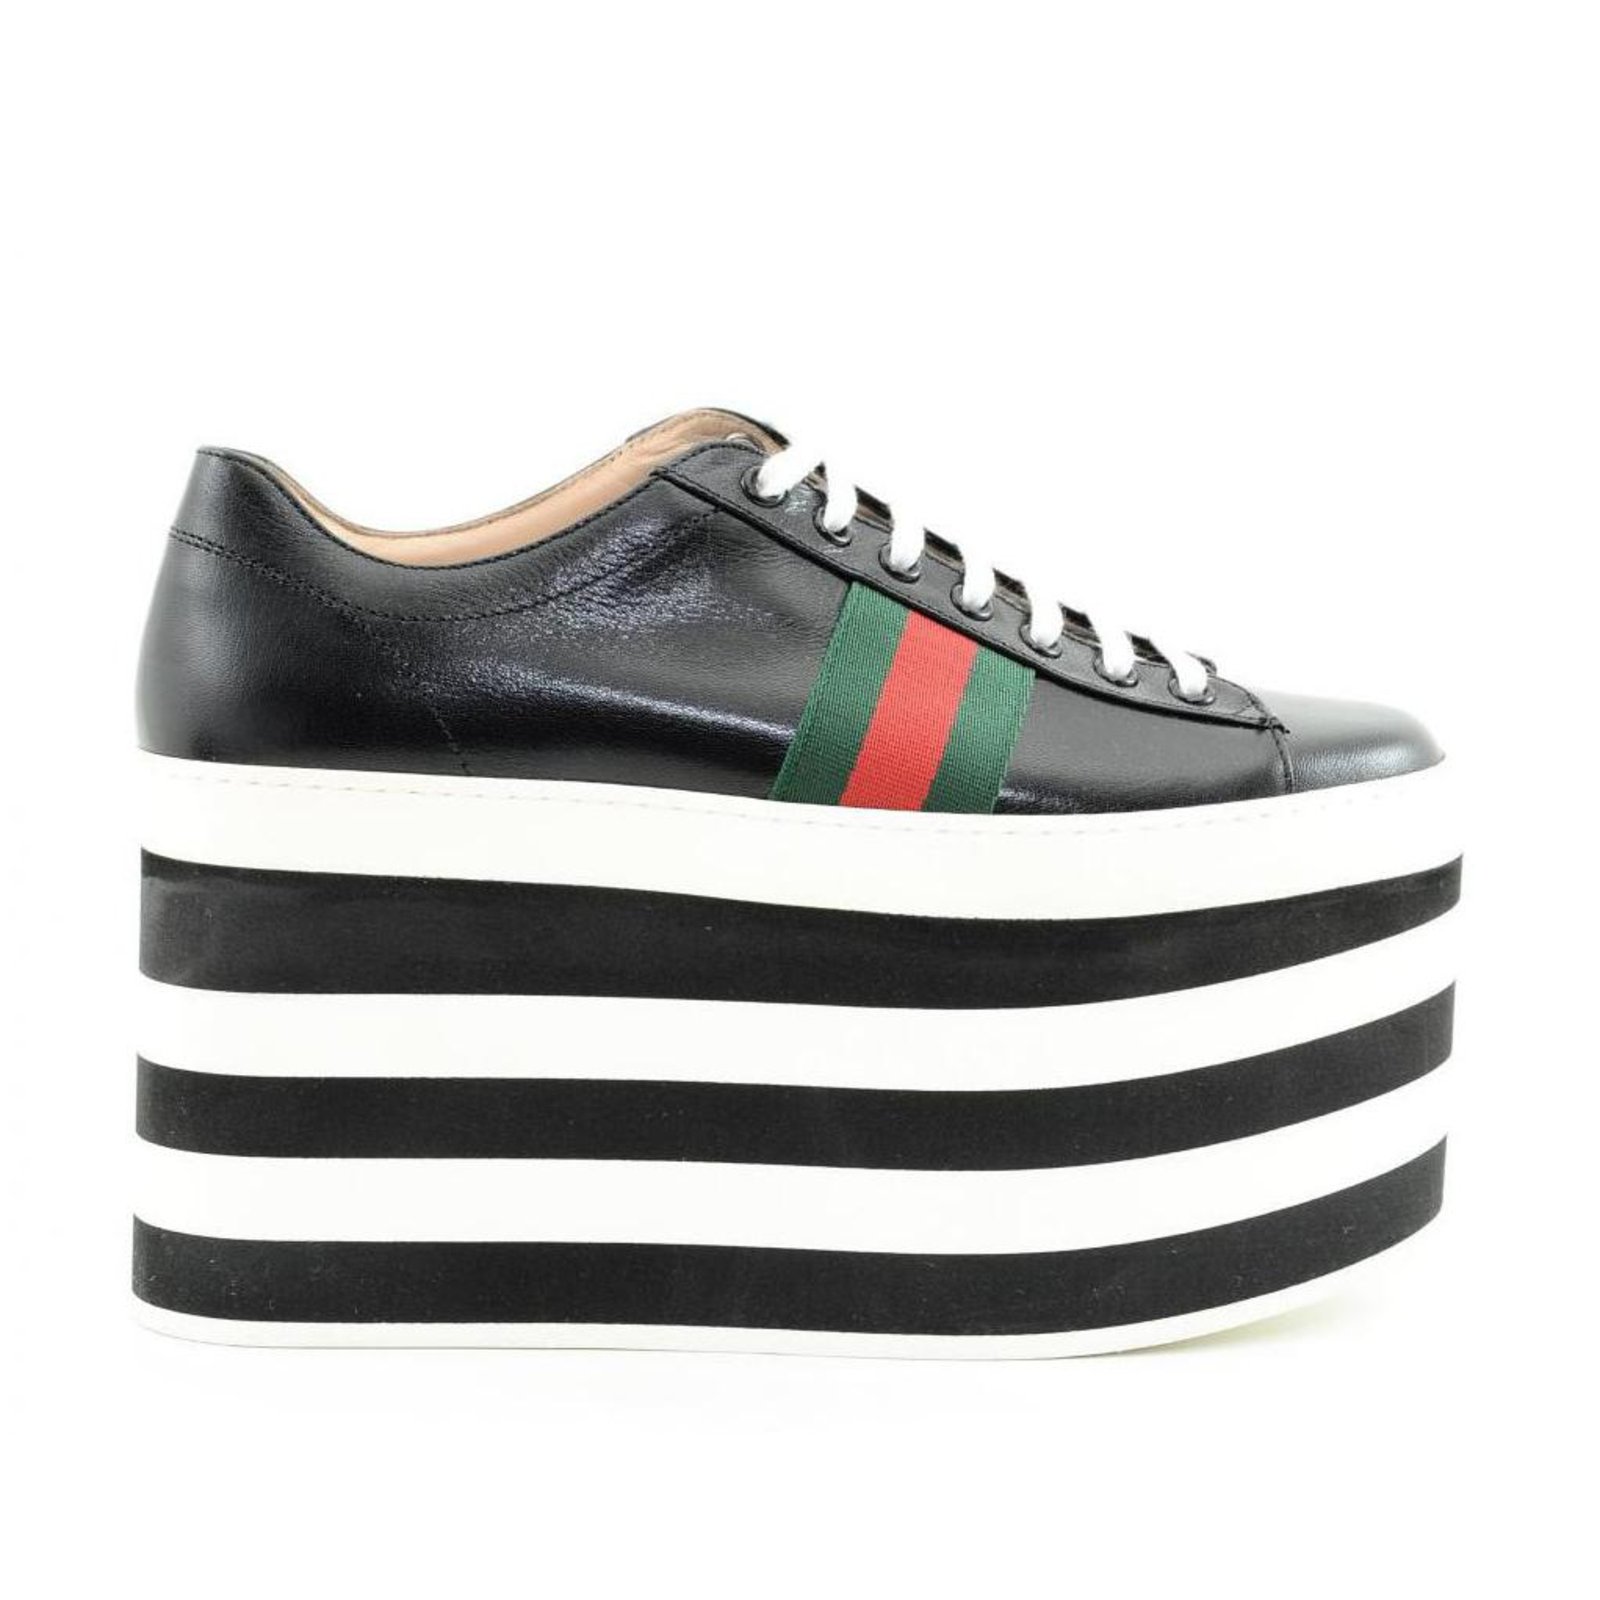 the new gucci shoes